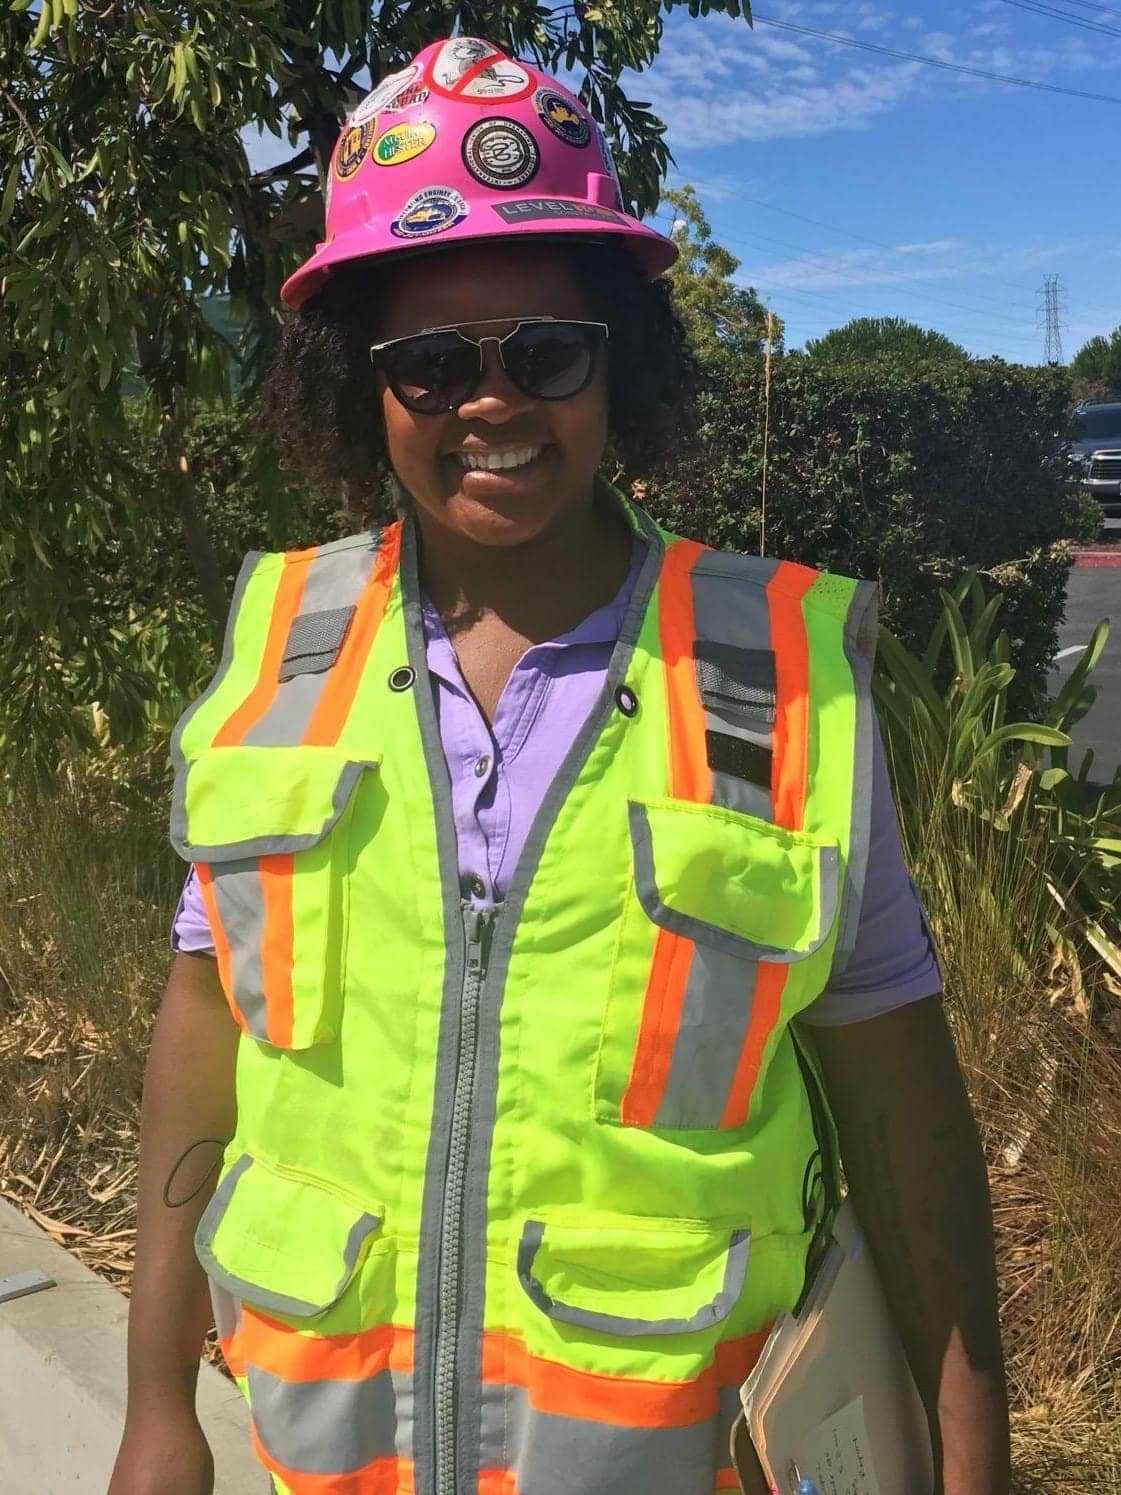 Meg-Anne-Pryor-Local-3-apprenticeship-coordinator-in-pink-hard-hat-at-job-site, Building up women for careers in construction, Local News & Views 